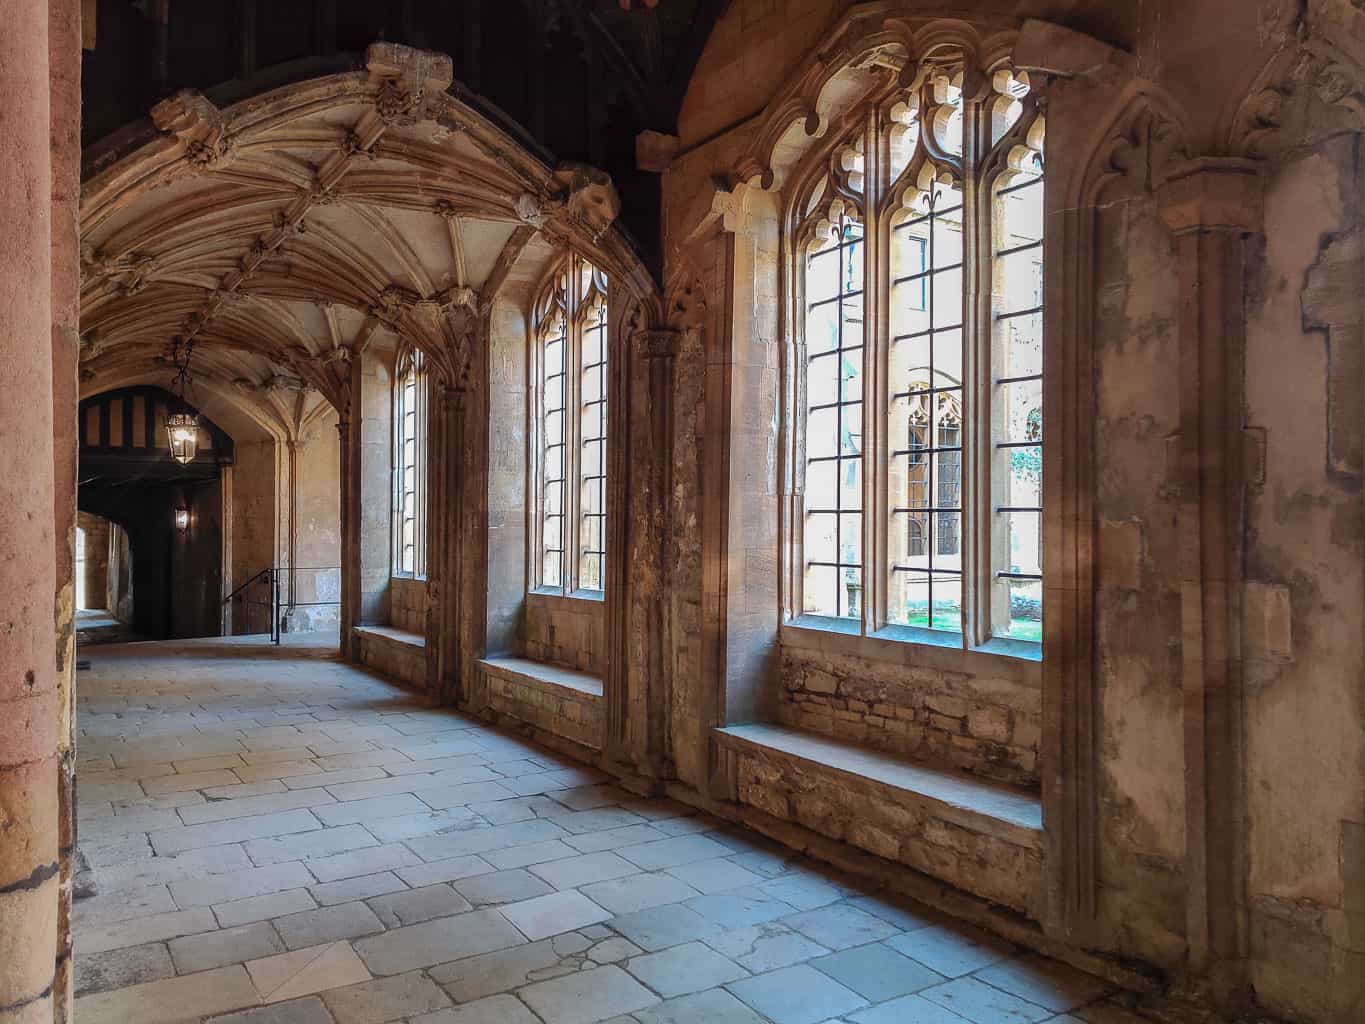 The Cloisters at Christ Church College